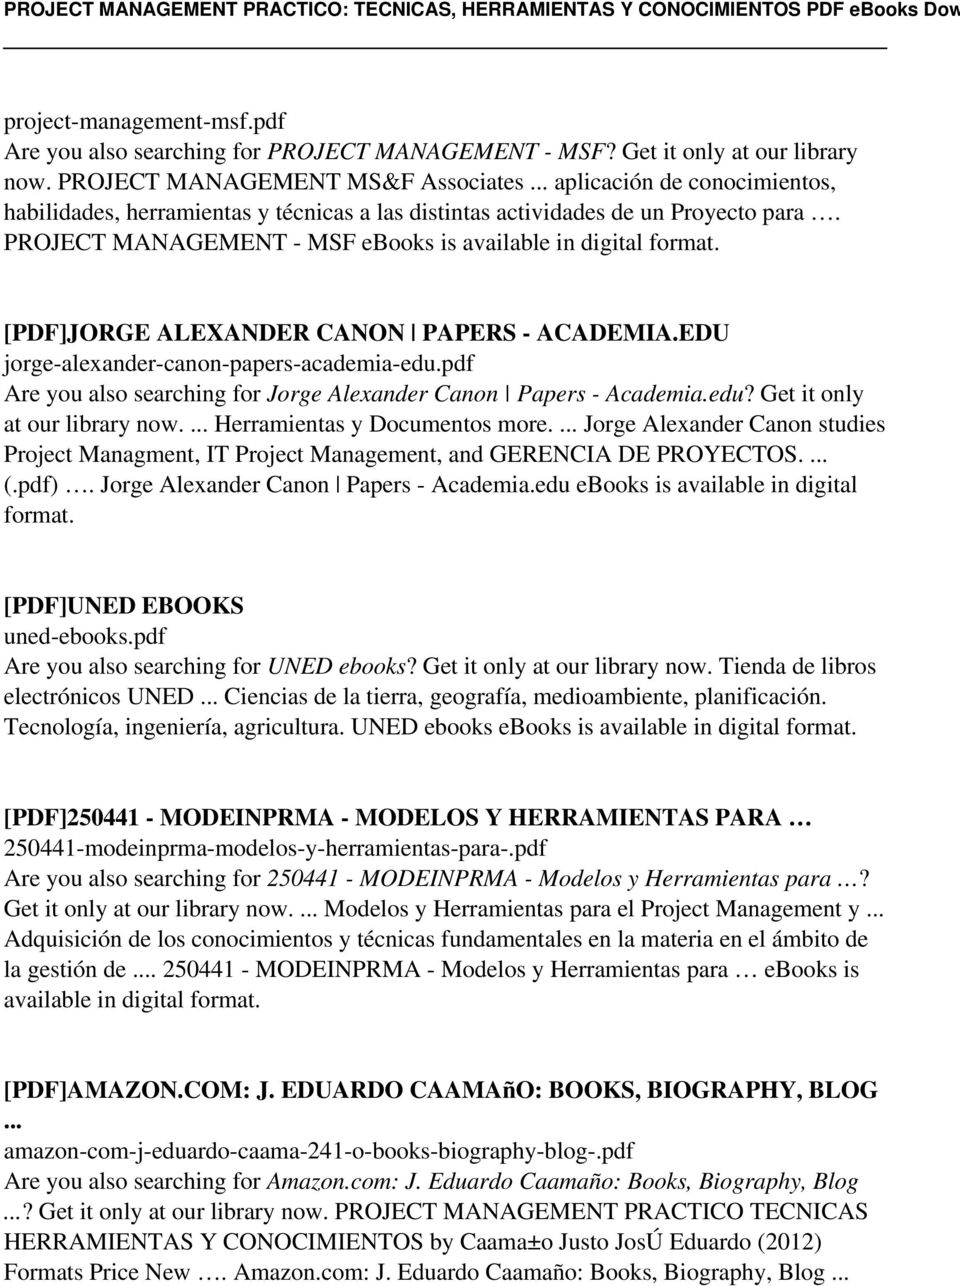 PROJECT MANAGEMENT - MSF ebooks is available in digital [PDF]JORGE ALEXANDER CANON PAPERS - ACADEMIA.EDU jorge-alexander-canon-papers-academia-edu.